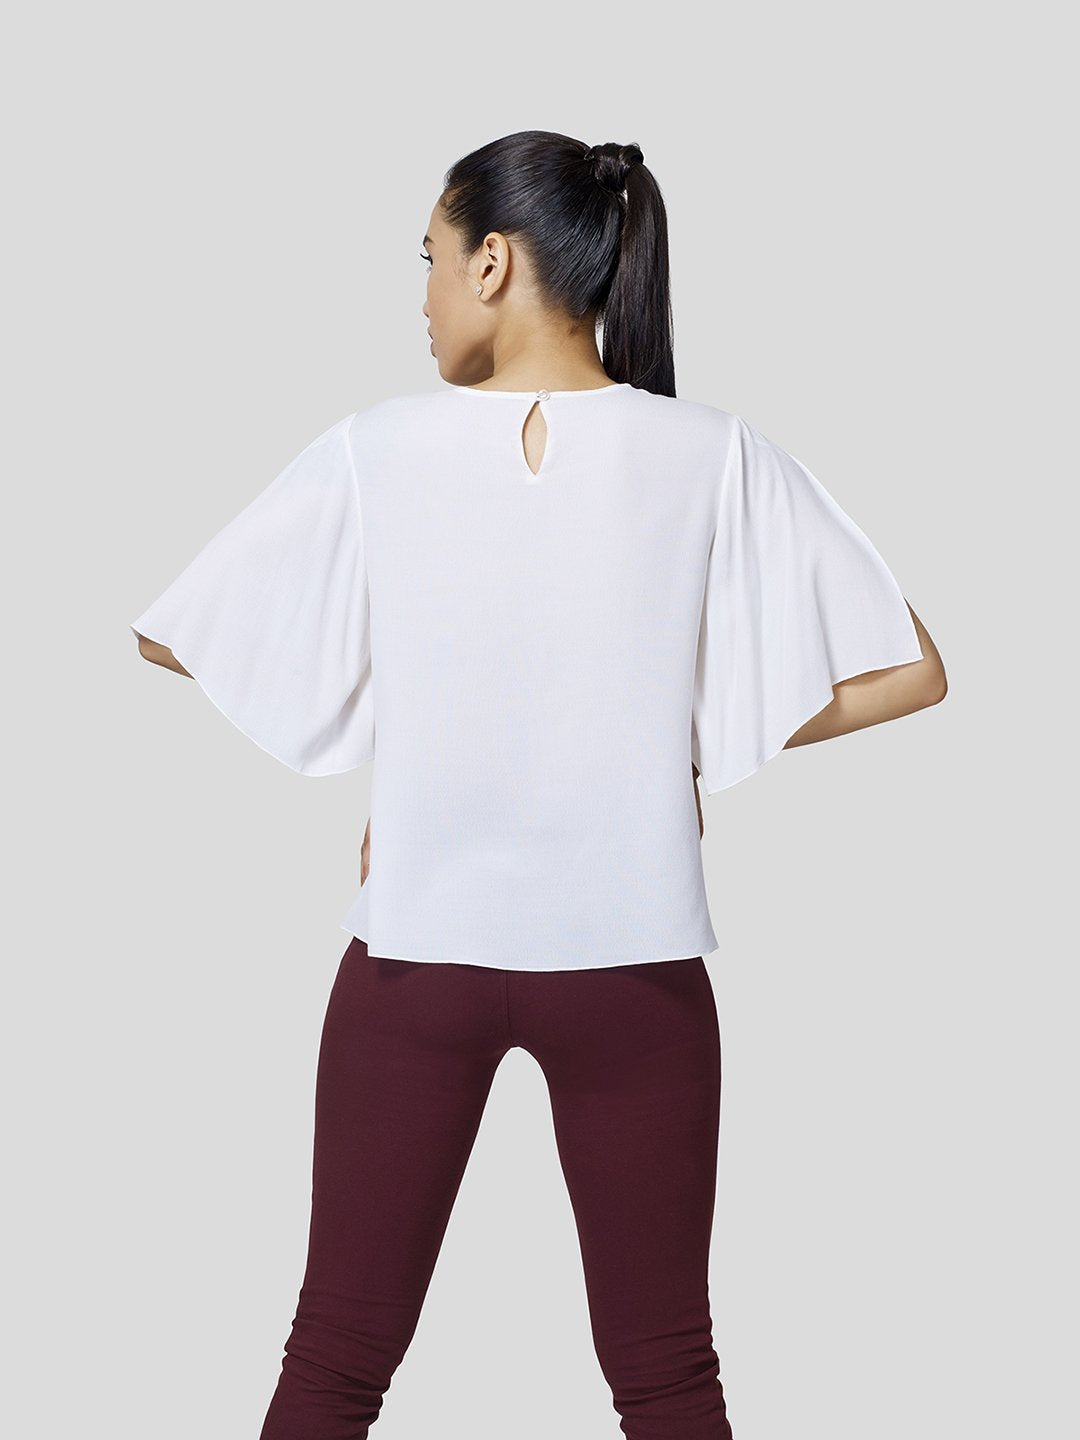 Box Fit Top With Overlapping Flared Sleeve - Zest Mélange 